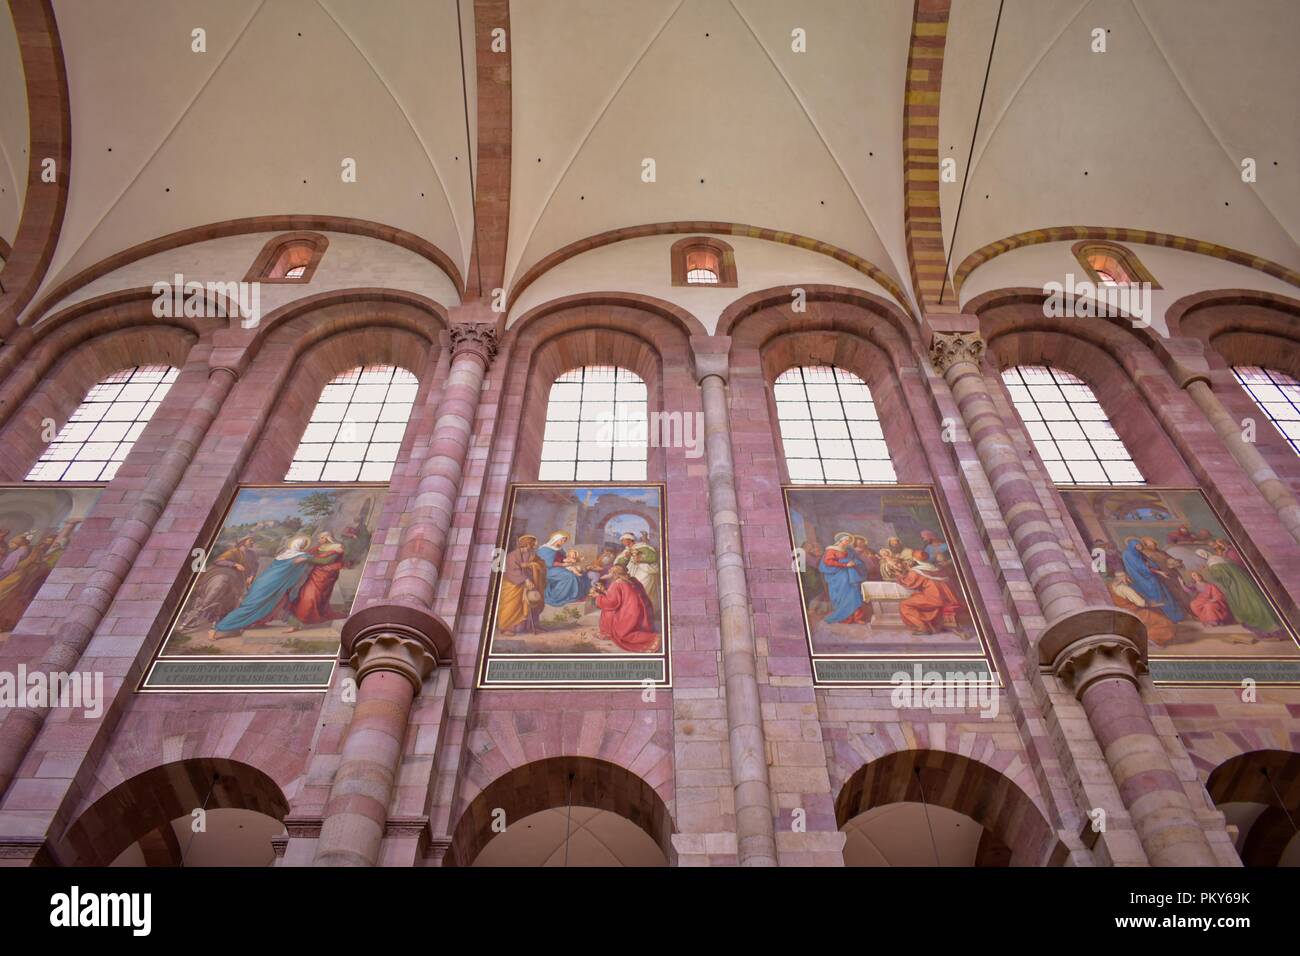 Speyer, Rhineland-Palatinate, Germany -July 6, 2018: View of paintings inside Speyer Cathedral. The Cathedral is a cultural UNESCO World Heritage Site Stock Photo